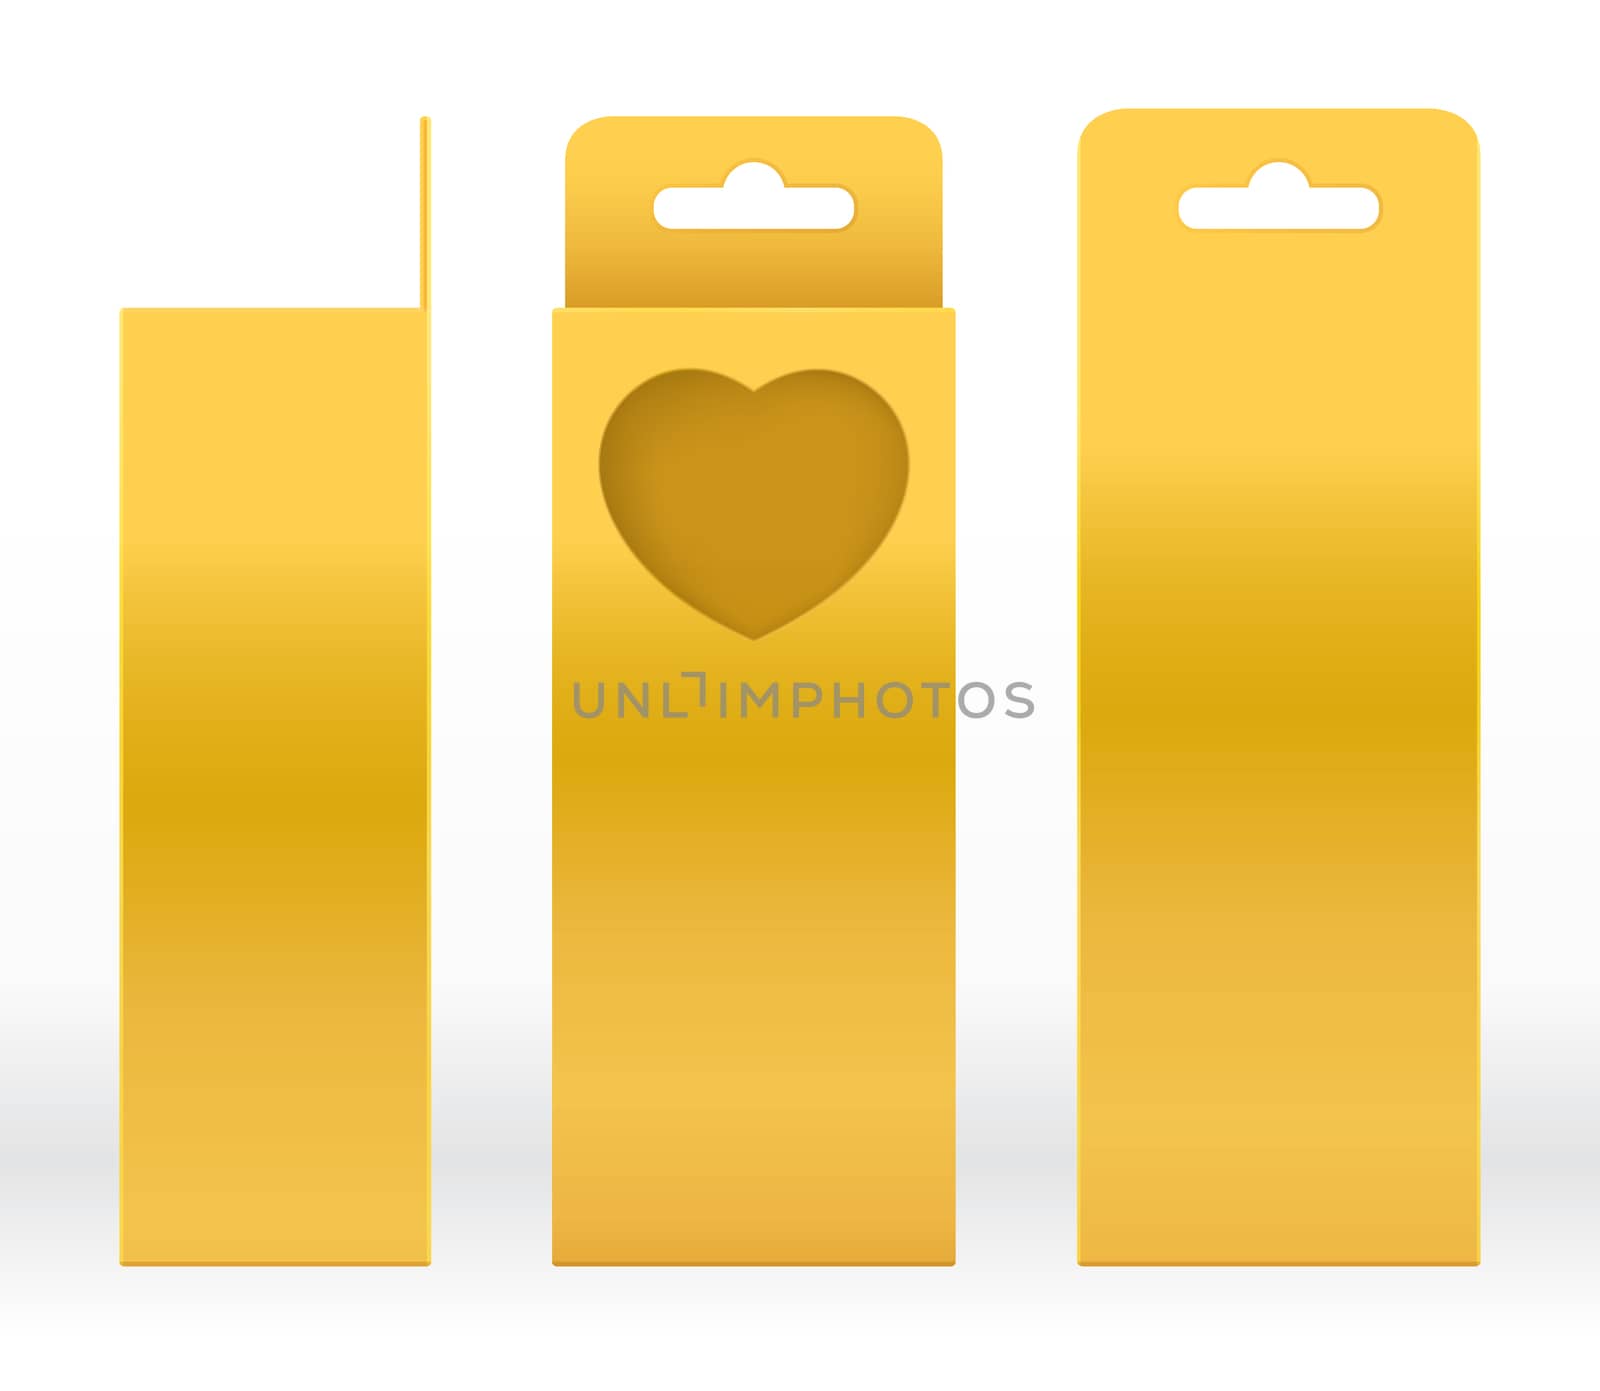 Hanging Box Gold window heart-shaped cut out Packaging Template blank. Luxury Empty Box Golden Template for design product package gift box, Gold Box packaging paper kraft cardboard package by cgdeaw